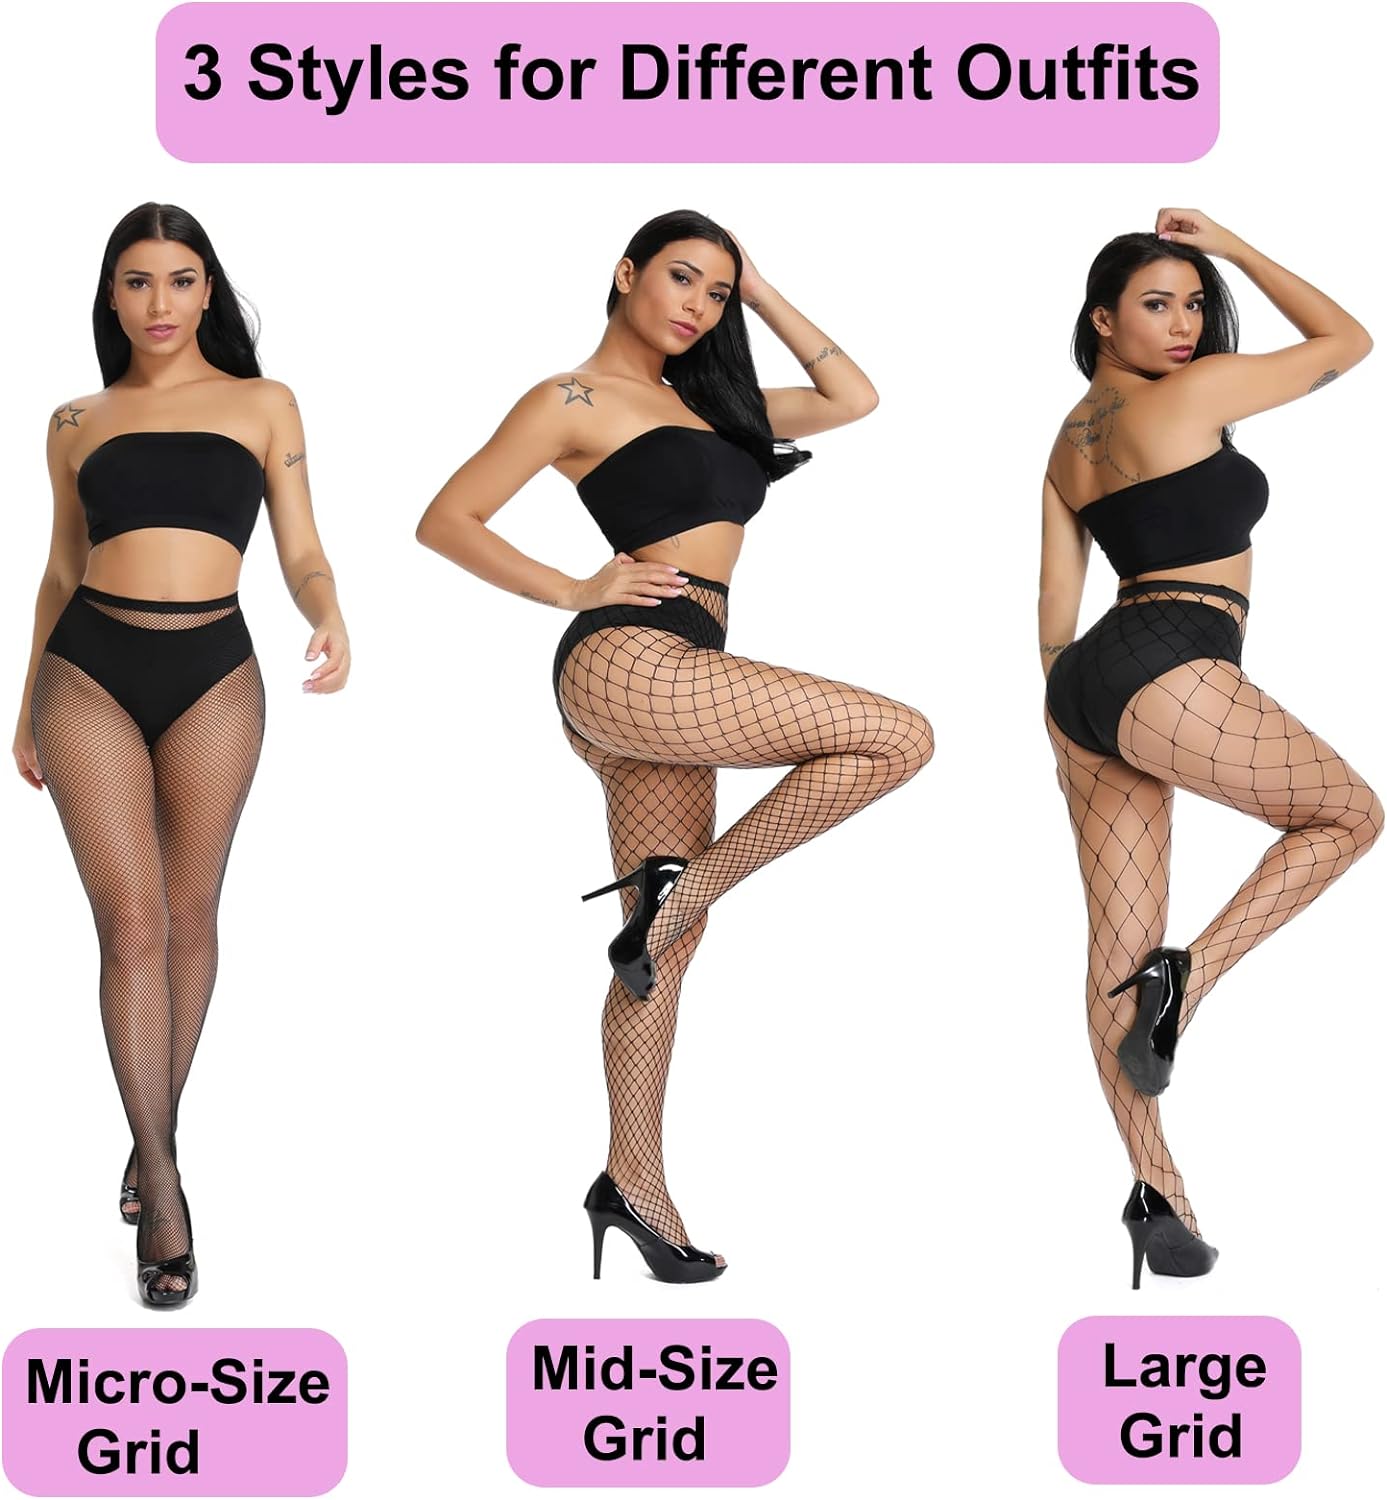 Akiido Fishnet Stockings: The Perfect Blend of Style and Comfort